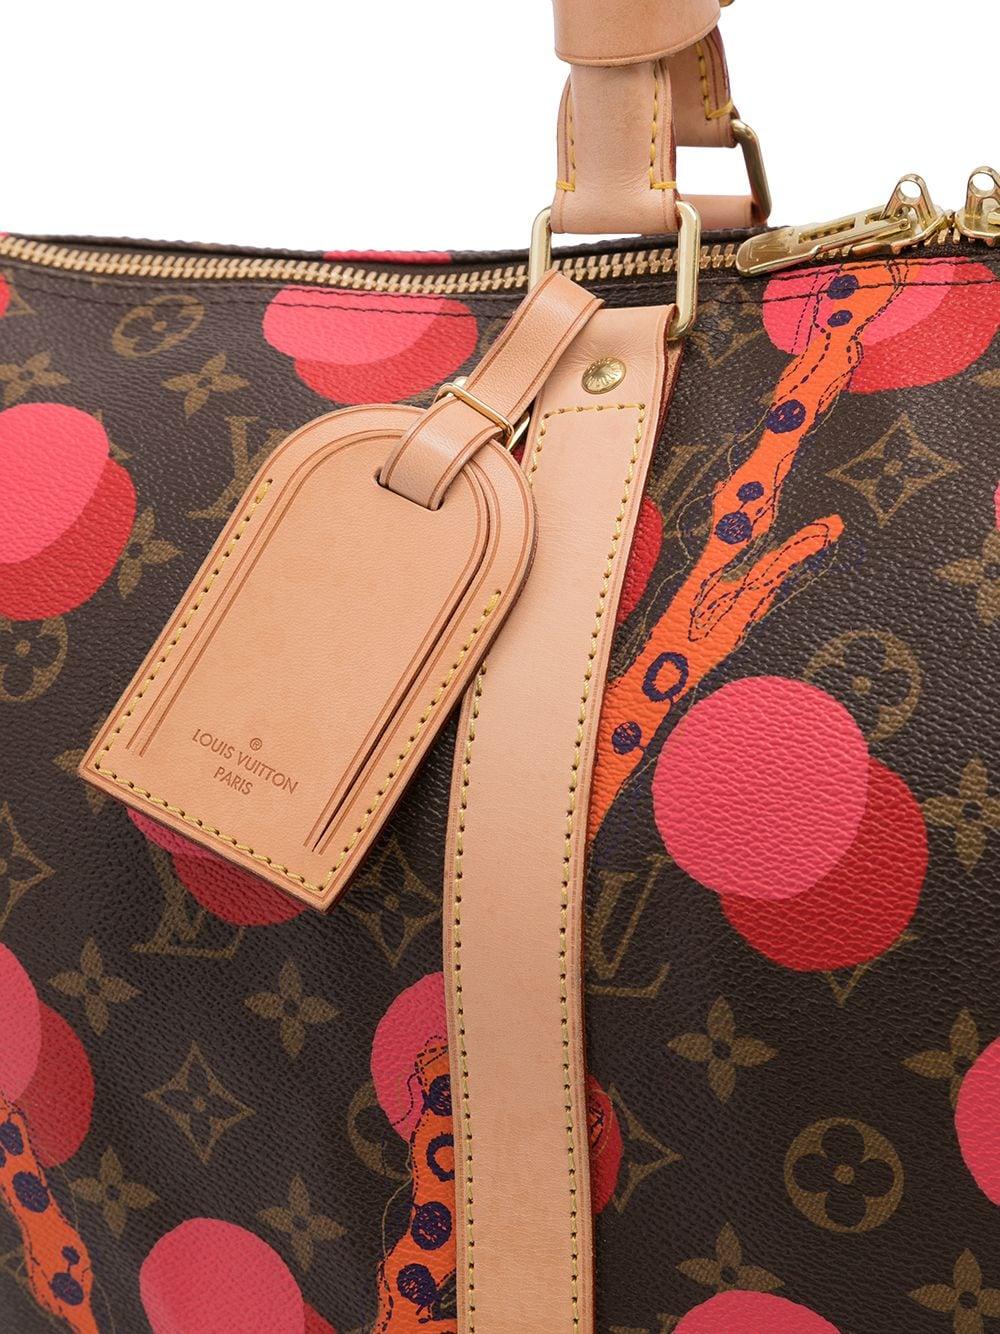 louis vuitton limited edition 2015